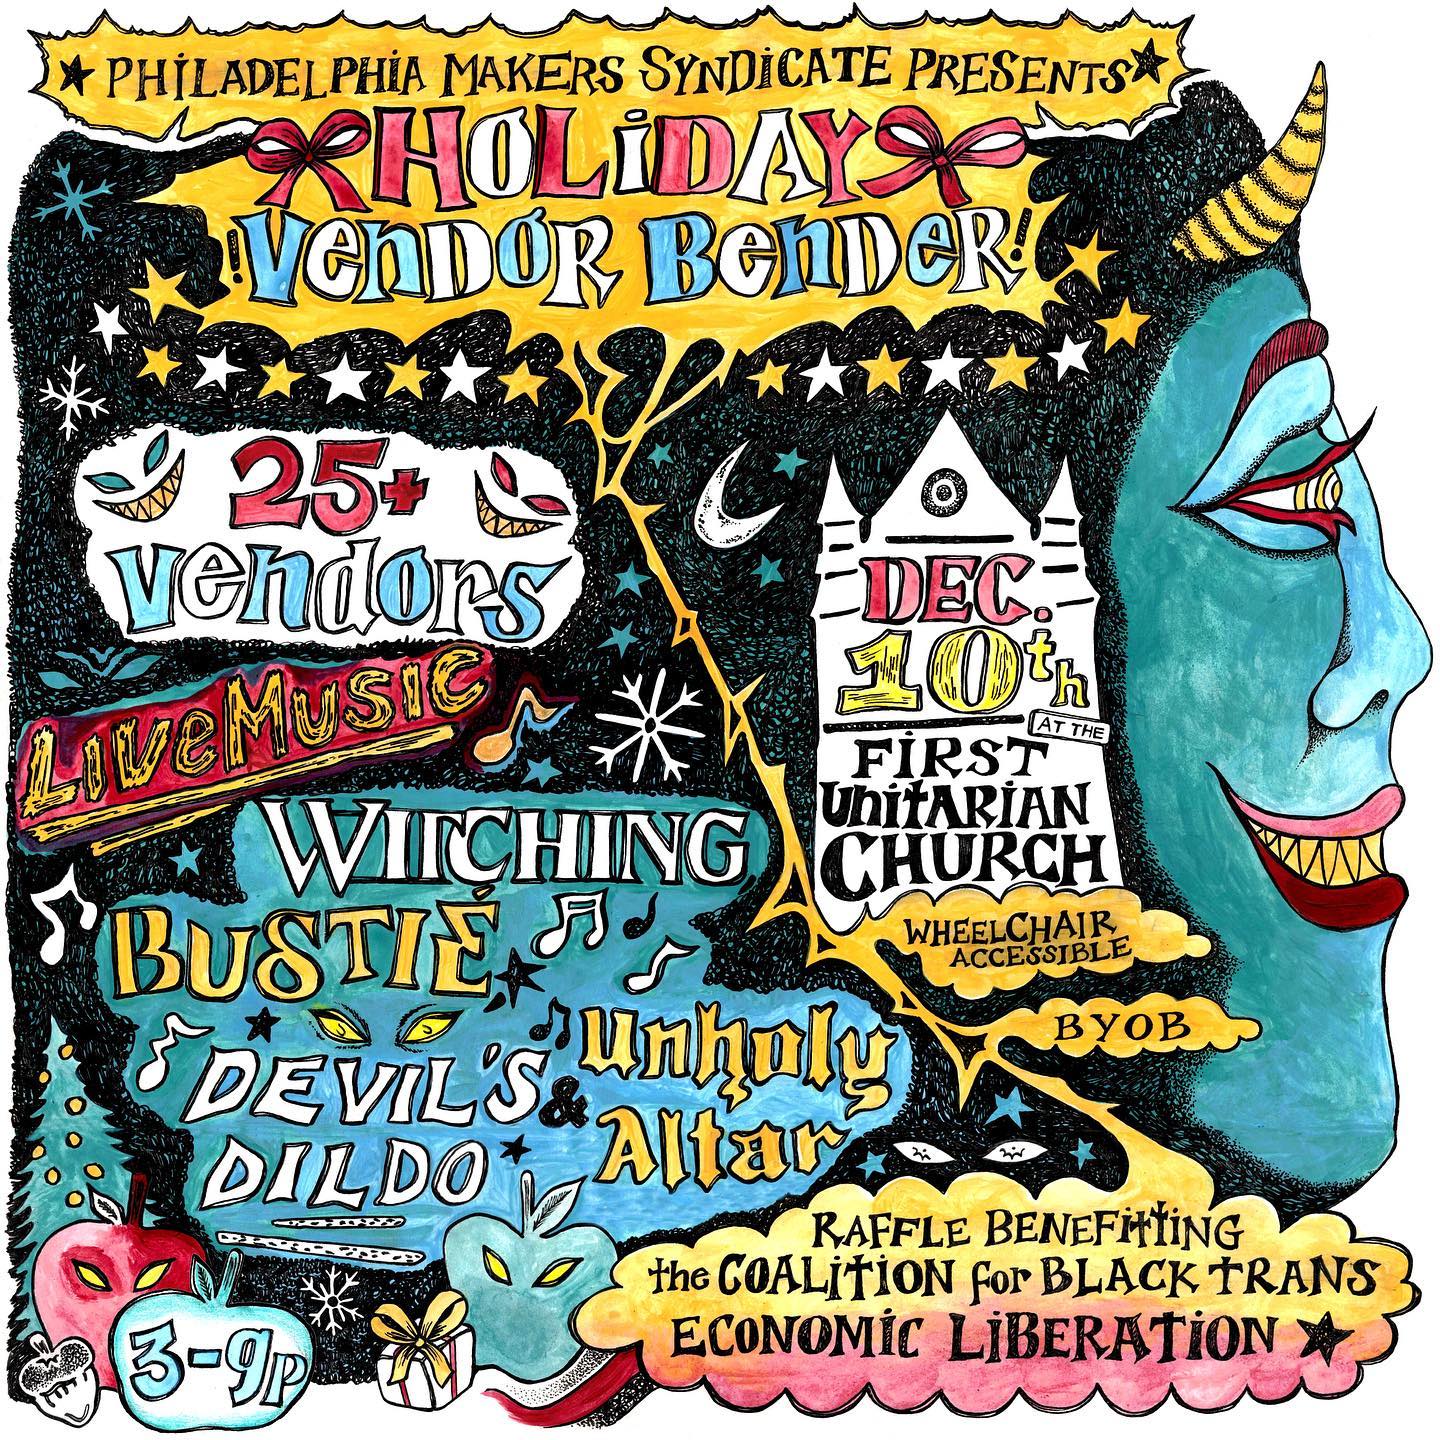 Flyer image with a drawing of a devil in profile, a silhouette of the First Unitarian Church in Philly, a christmas tree, a moon, music notes, a present, snowflakes, etc. The text reads as follows: Philadelphia Makers Syndicate Presents Holiday Vendoro Bender! 25+ Vendors Dec 10th at the First Unitarian Church 3–9 p.m. Wheelchair Accessible BYOB Raffle benefitting the Coalition for Black Trans Economic Liberation Live Music: Witching Bustie Devil's Dildo & Unholy Altar